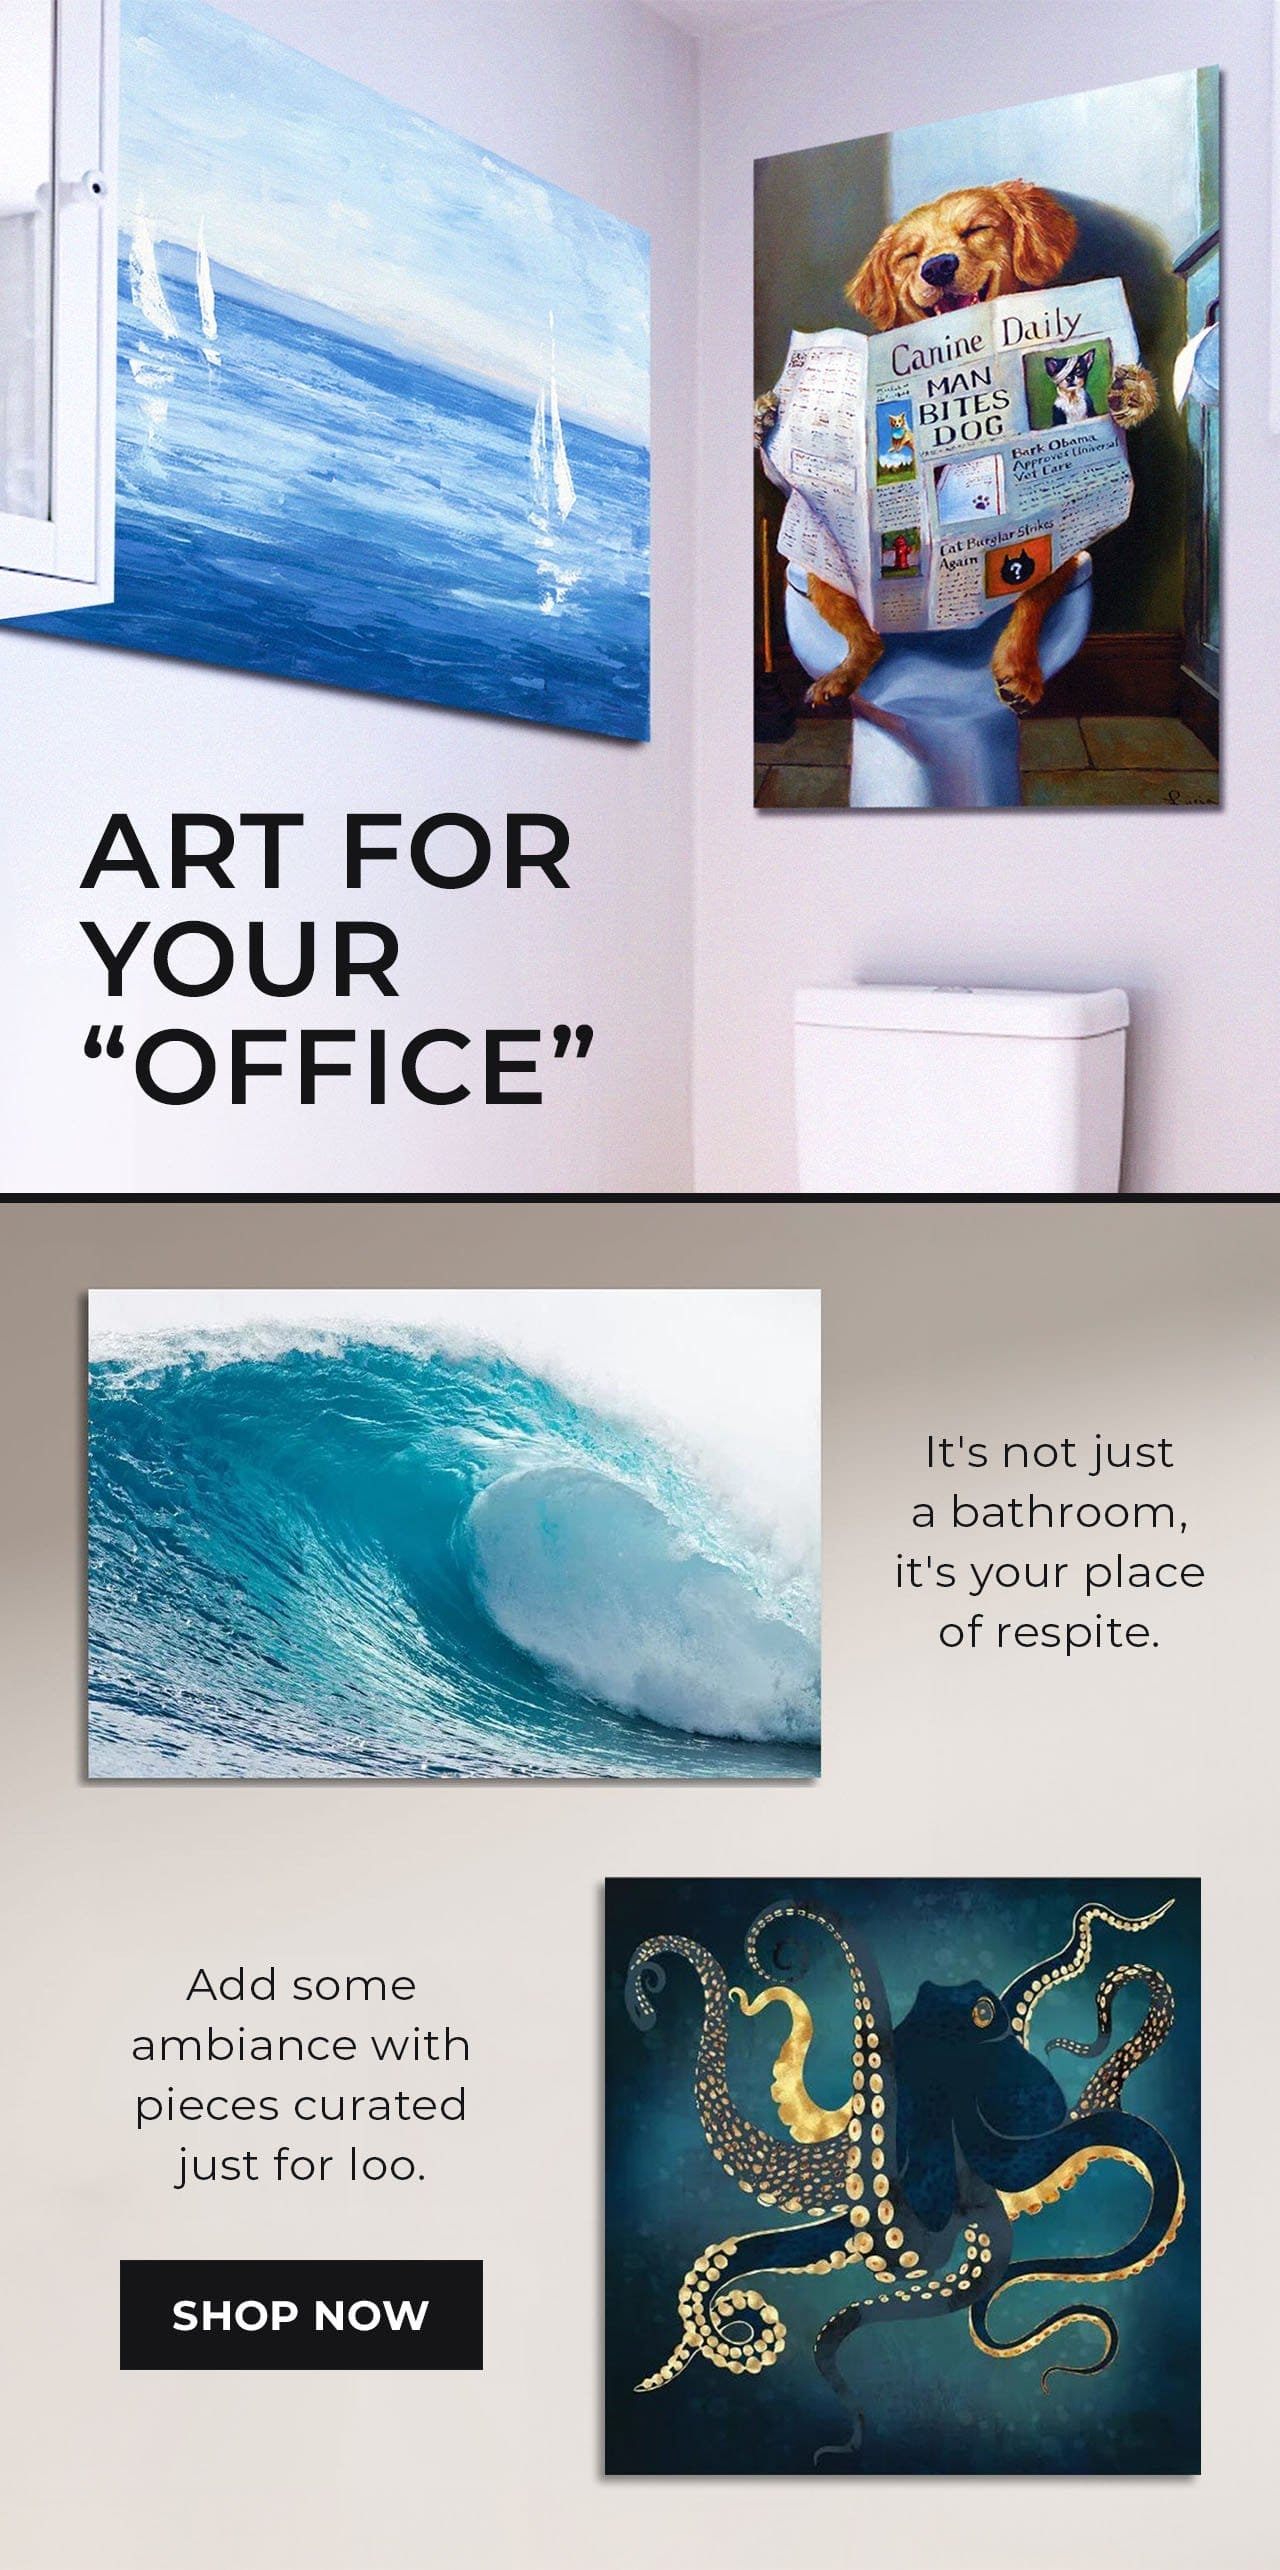 Art For Your “Office” | SHOP NOW